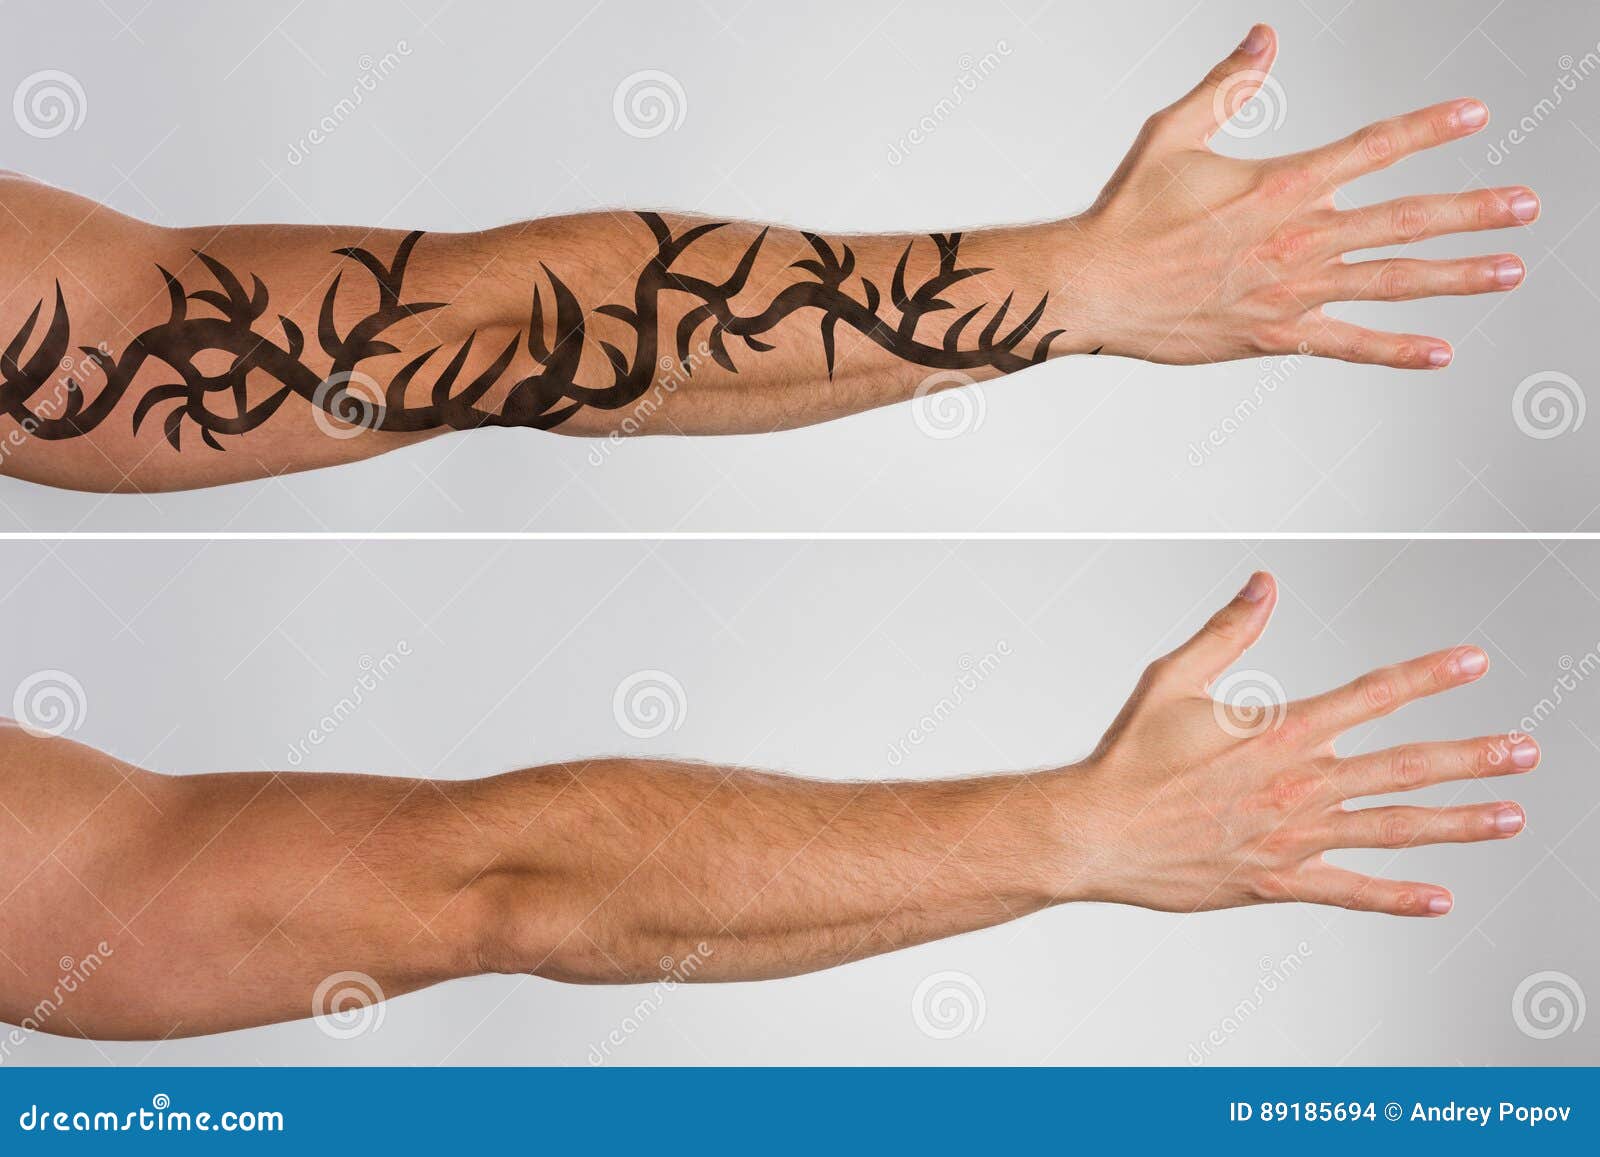 1. Laser Tattoo Removal for Neck Tattoos - wide 5